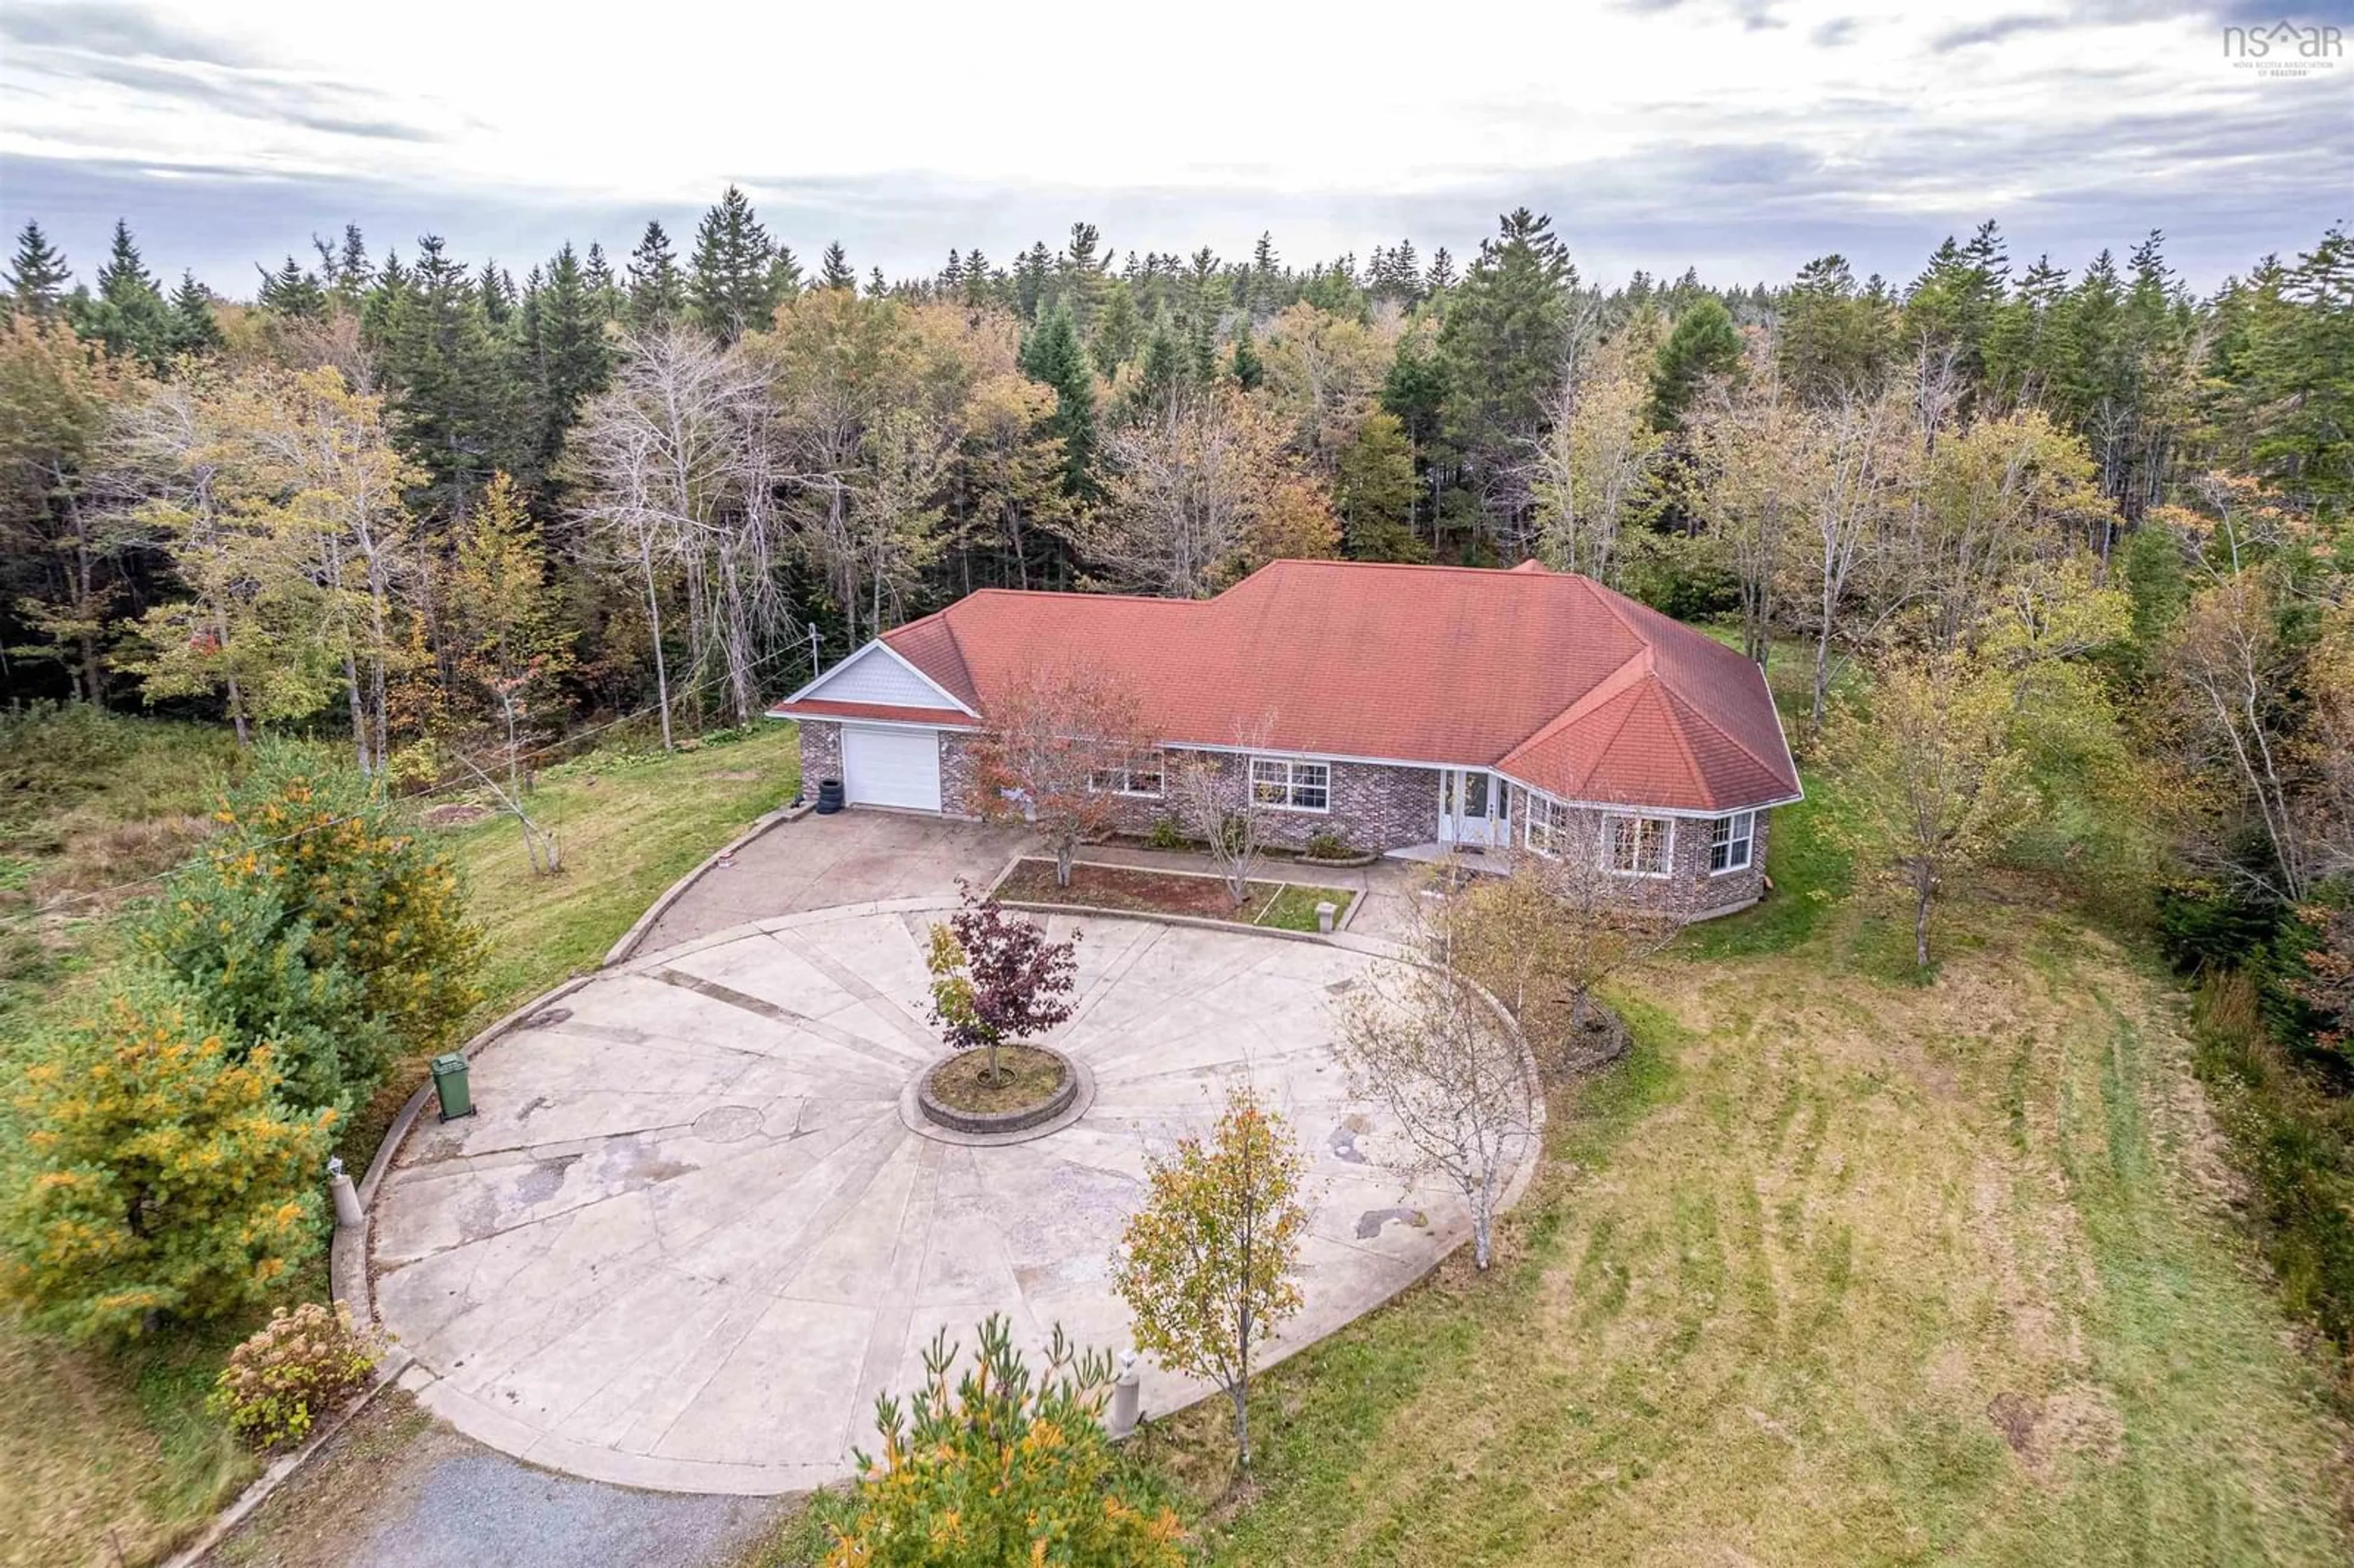 Home with unknown exterior material for 10 Salto Dr, Lucasville Nova Scotia B4B 1R7